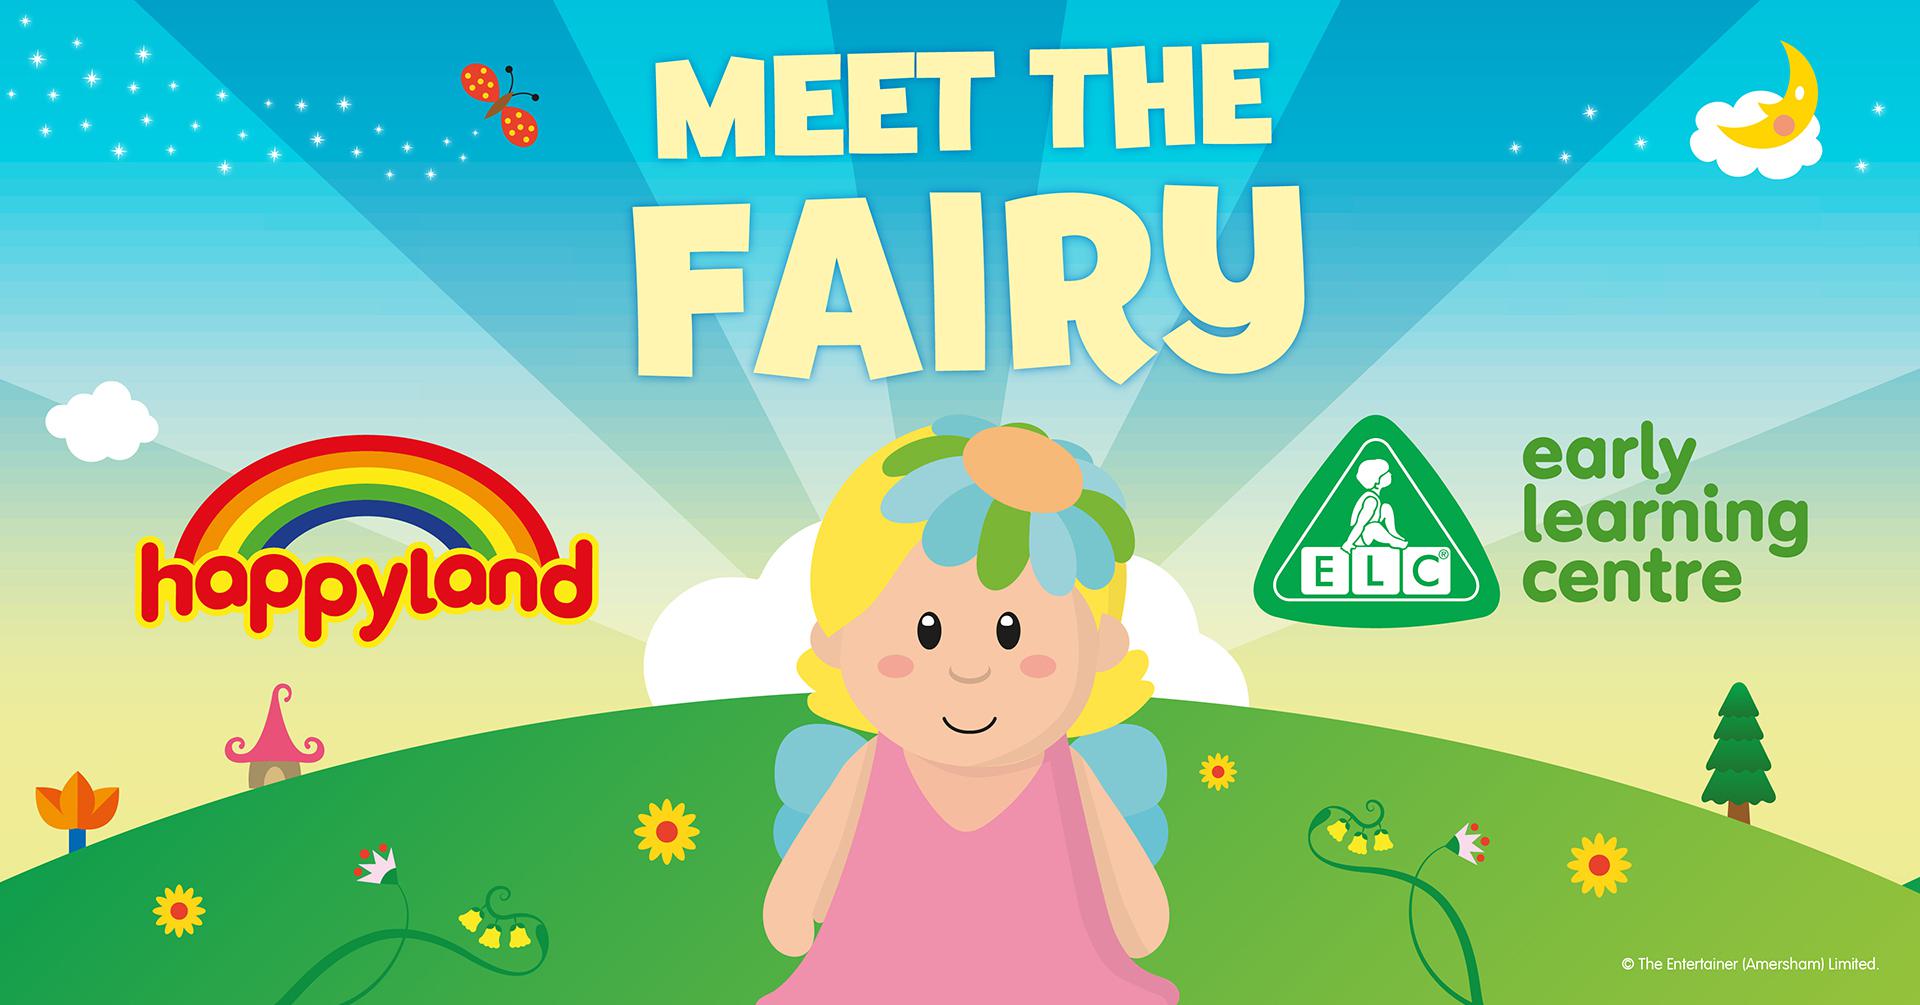 Meet the fairy with the Entertainer